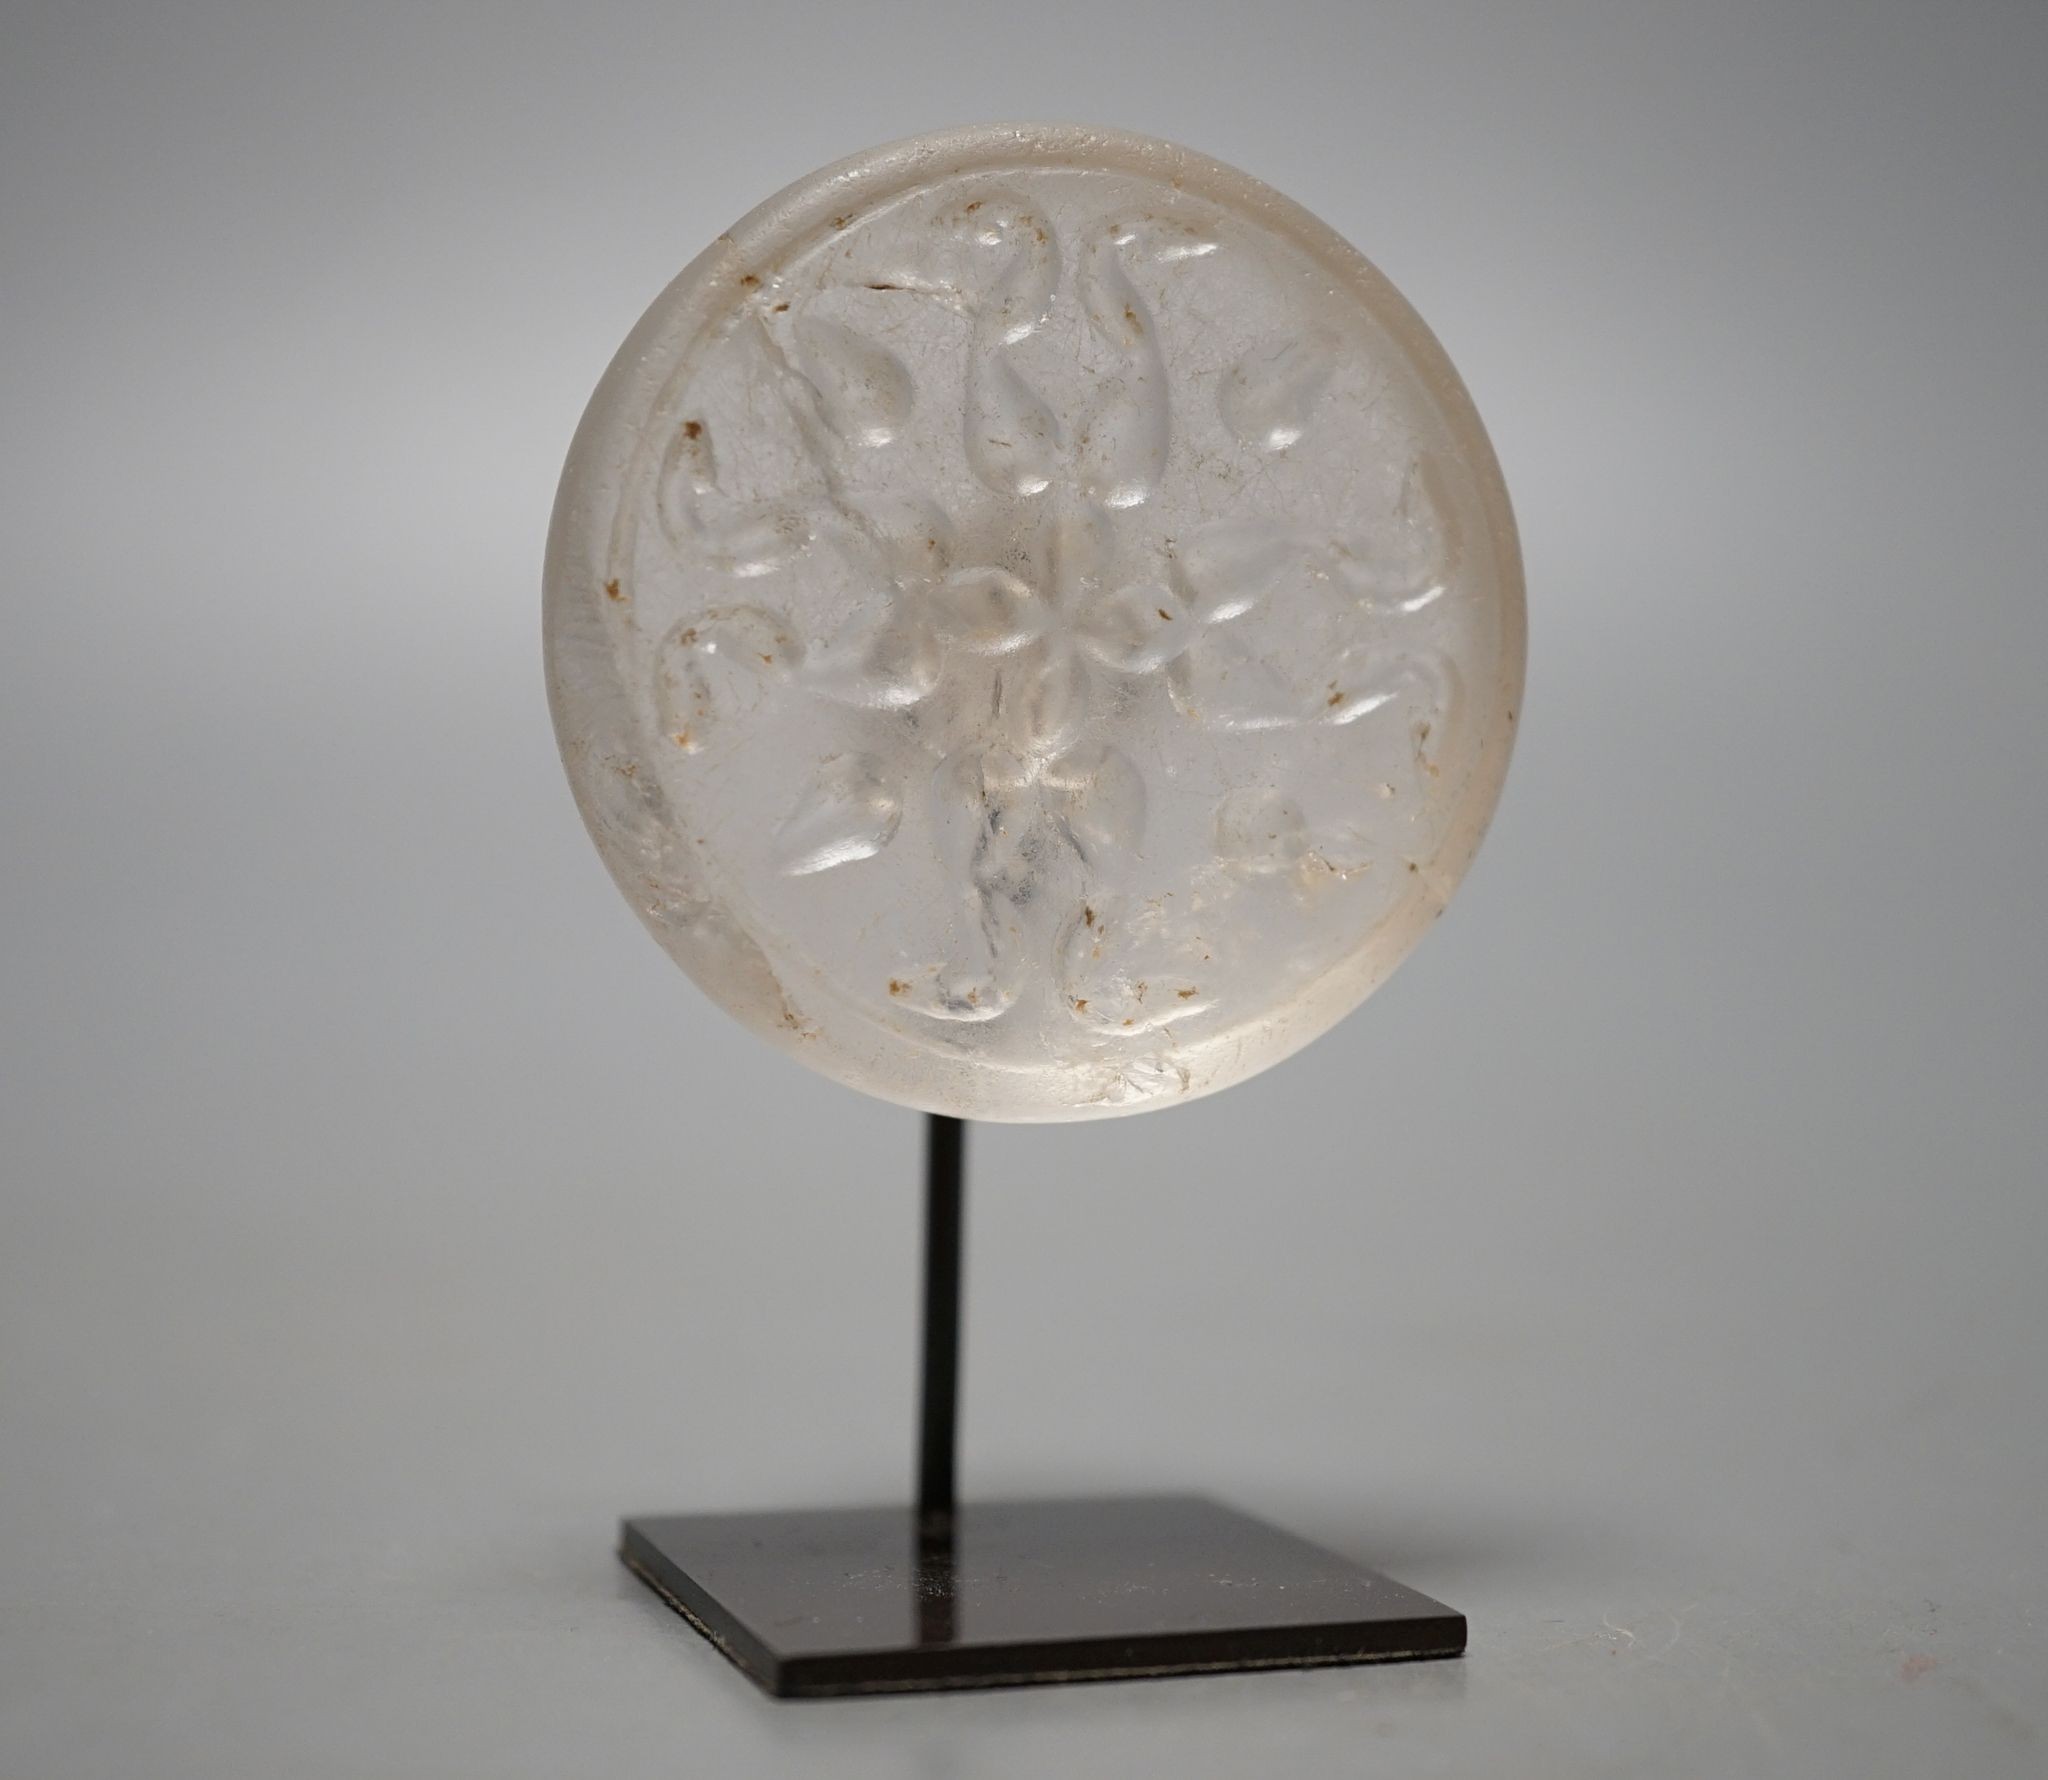 A 13th/14th century Persian rock crystal seal, 5cm